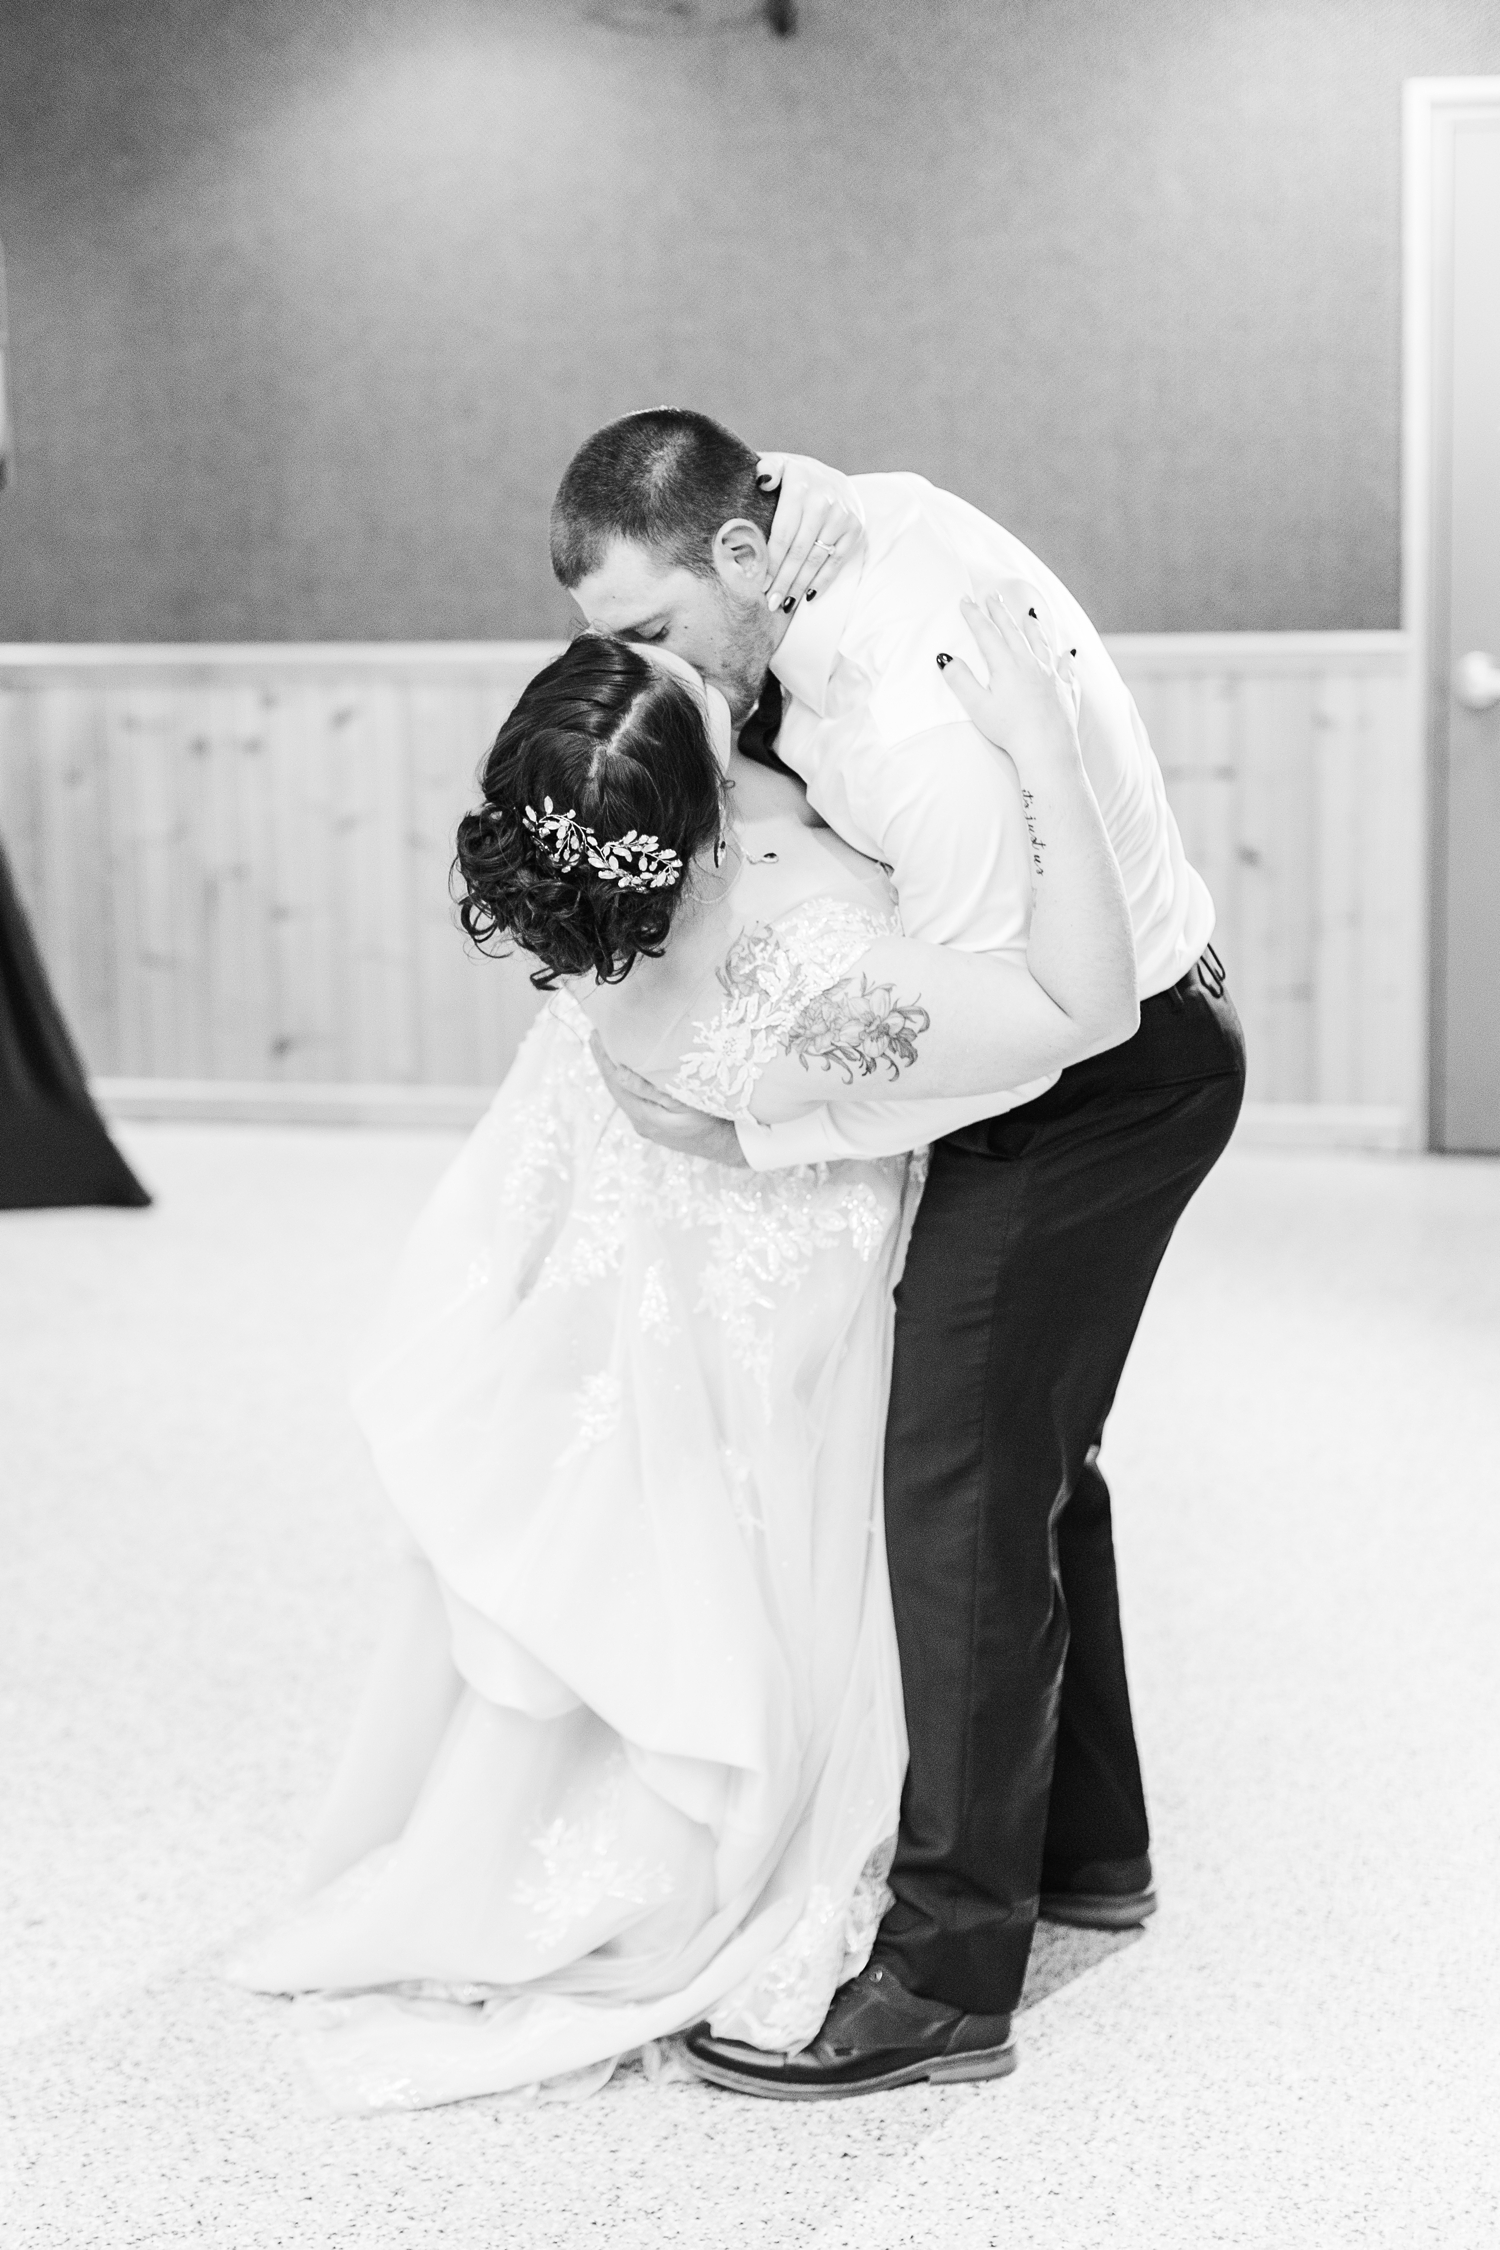 Austin dips his new bride, Mary, for a kiss at the end of their First Dance together at Humboldt County Fairgrounds | CB Studio